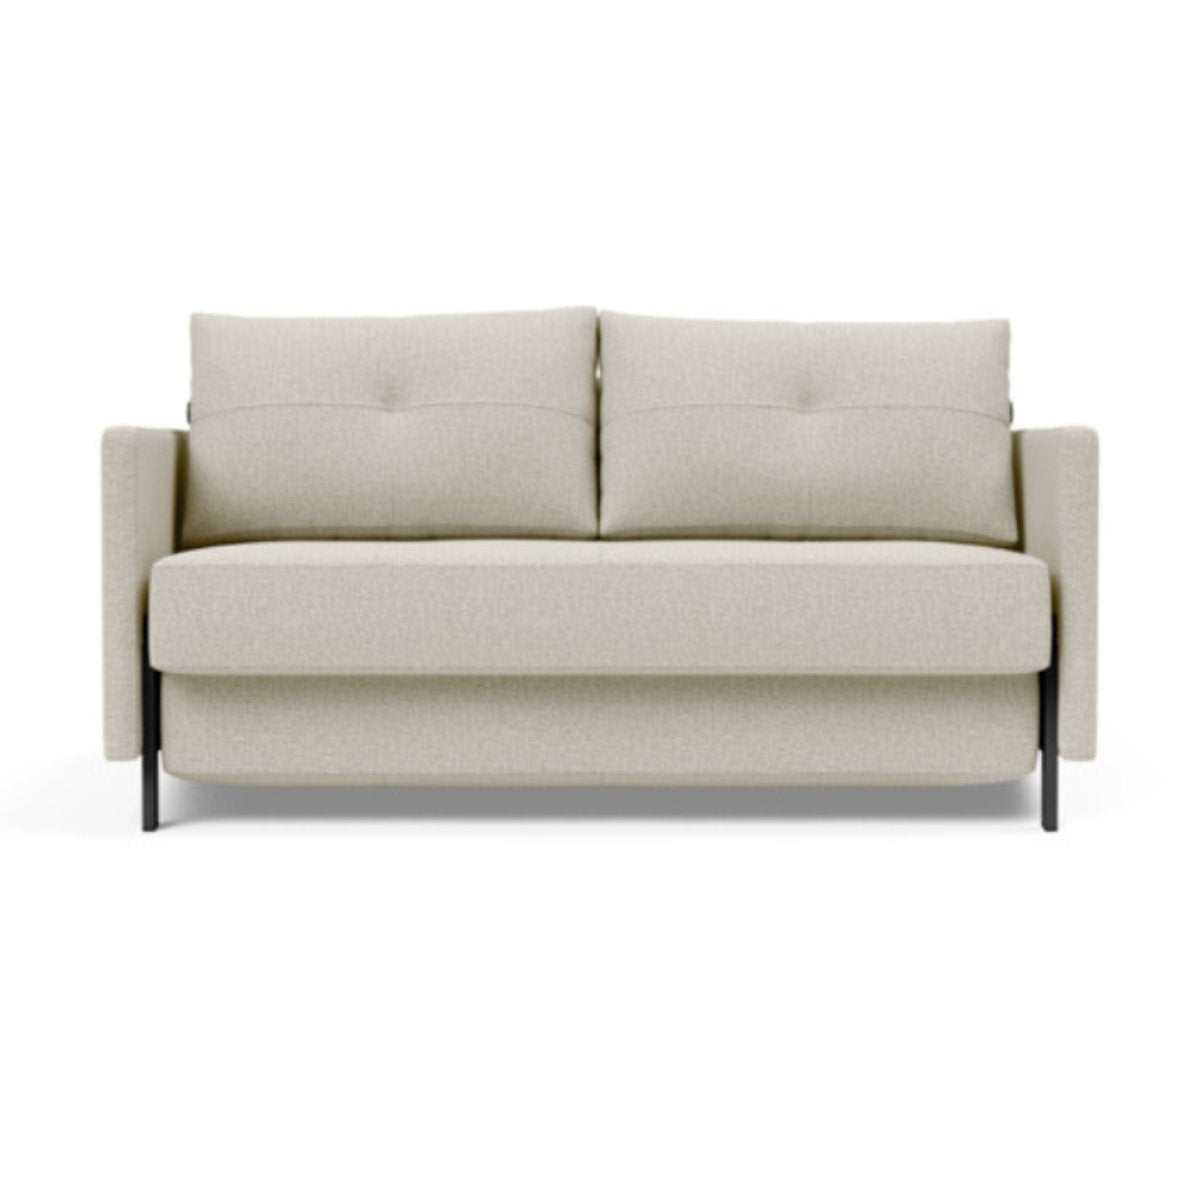 Cubed Full Size Sofa Bed With Arms 527 Mixed Dance NaturalSofa Beds INNOVATION  527 Mixed Dance Natural   Four Hands, Burke Decor, Mid Century Modern Furniture, Old Bones Furniture Company, Old Bones Co, Modern Mid Century, Designer Furniture, https://www.oldbonesco.com/